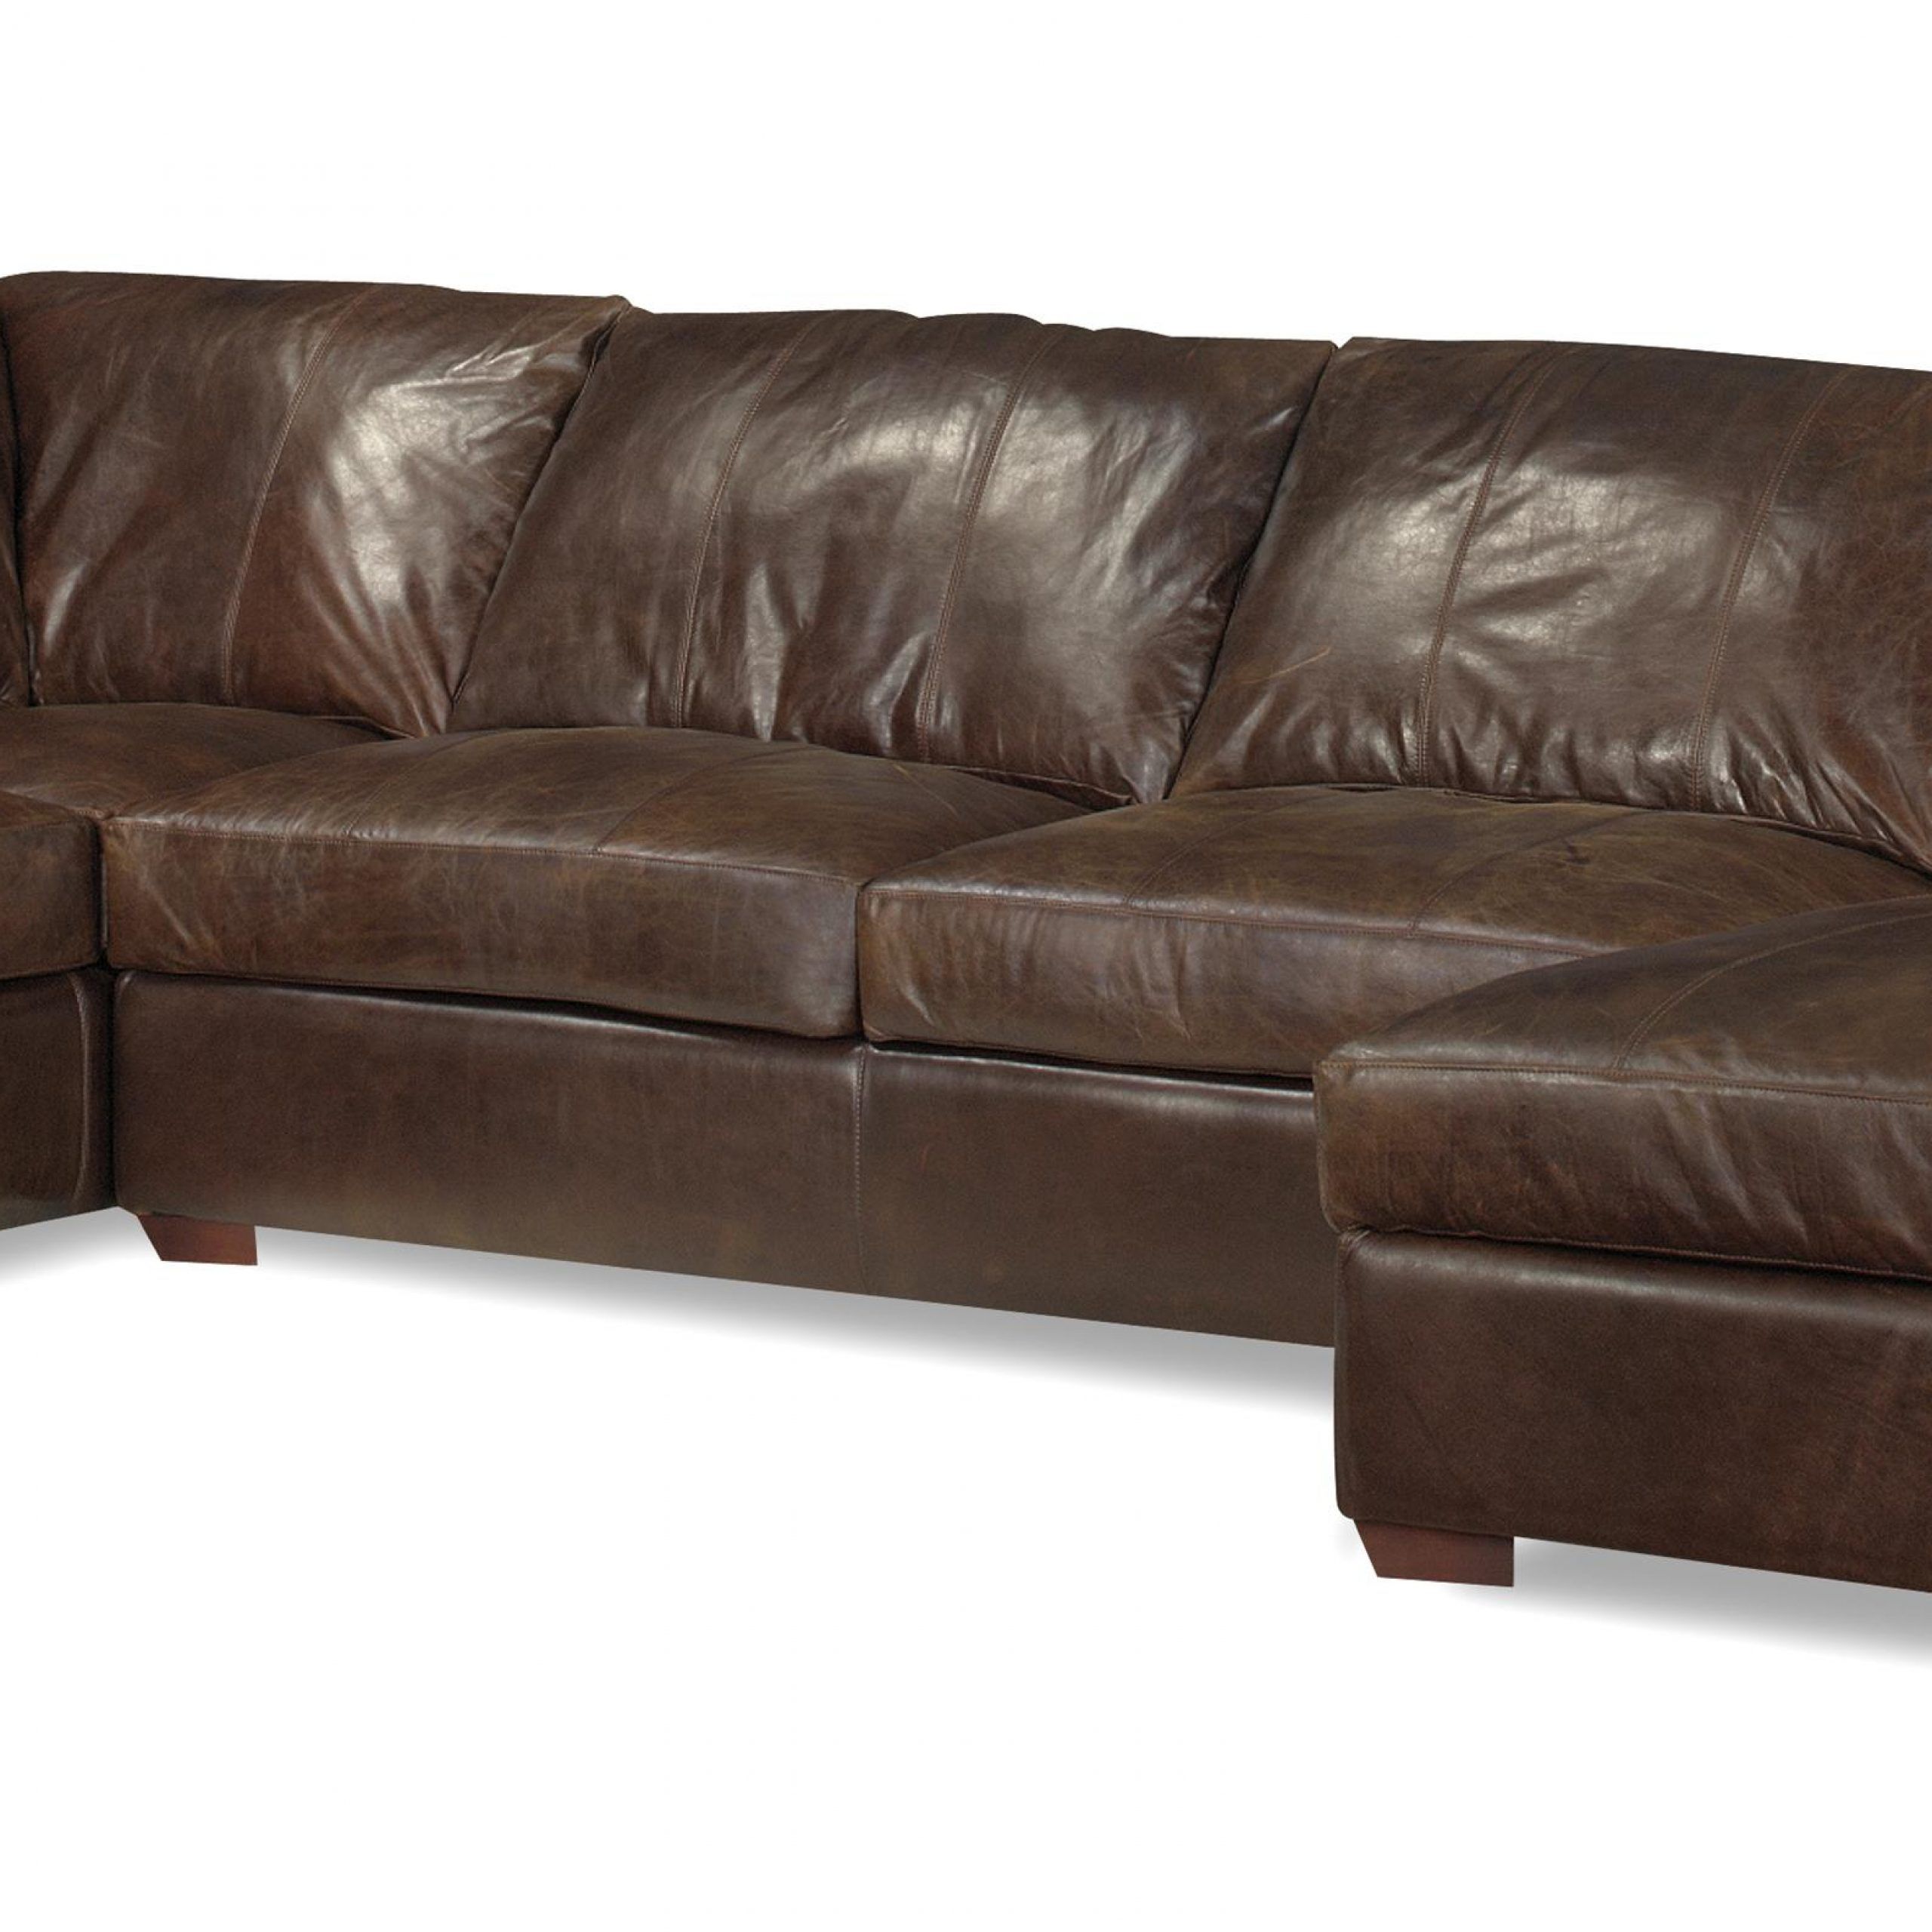 Leather Chaise Sectional Sofa Abbyson Tuscan Top Grain With 3pc Miles Leather Sectional Sofas With Chaise (View 7 of 15)